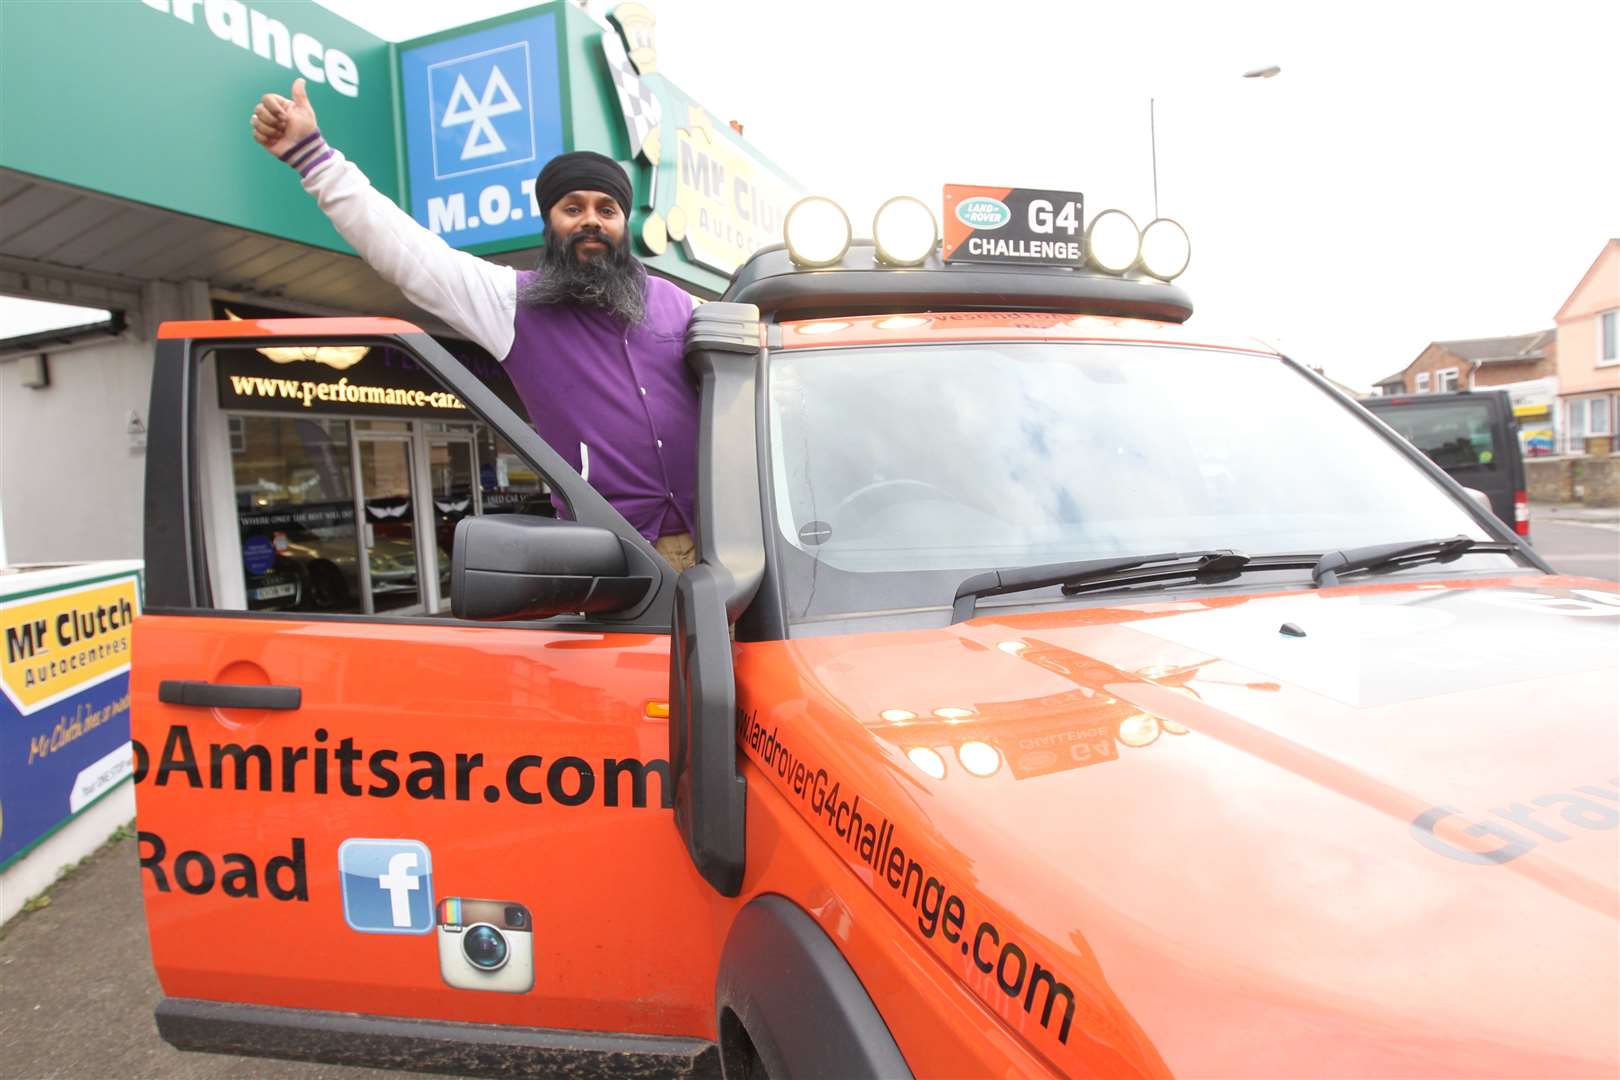 Jagjit Singh Grewal and his good friend Rapinder Singh Cheema will drive from Gravesend to Amritsar in India in 14 days,